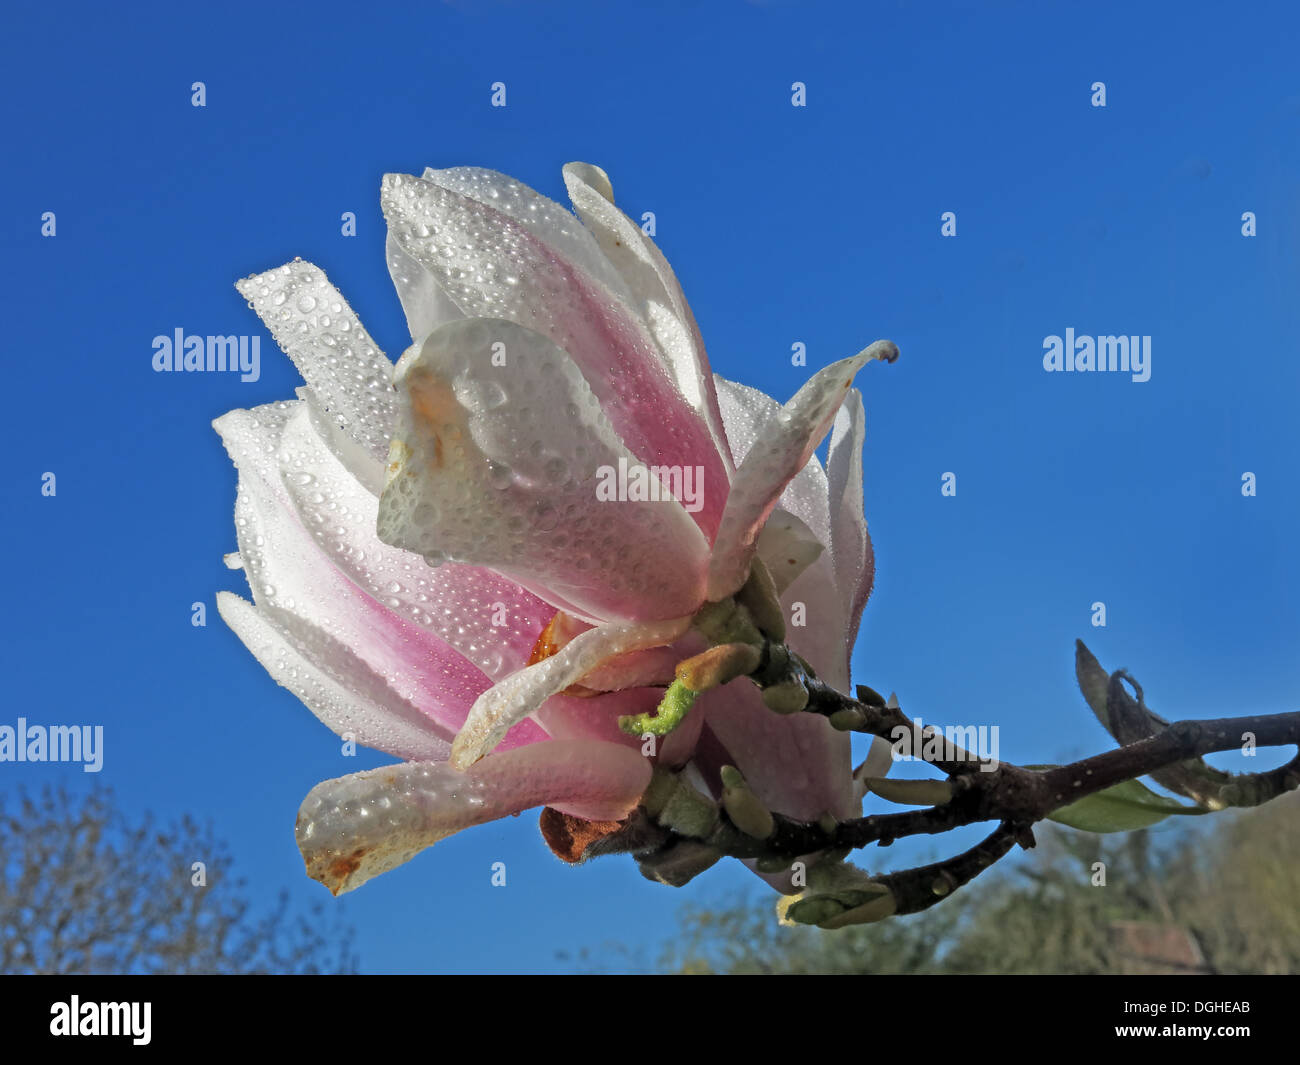 Signs of spring New creme white apple / cherry Blossom flowers against a deep blue sky England Stock Photo